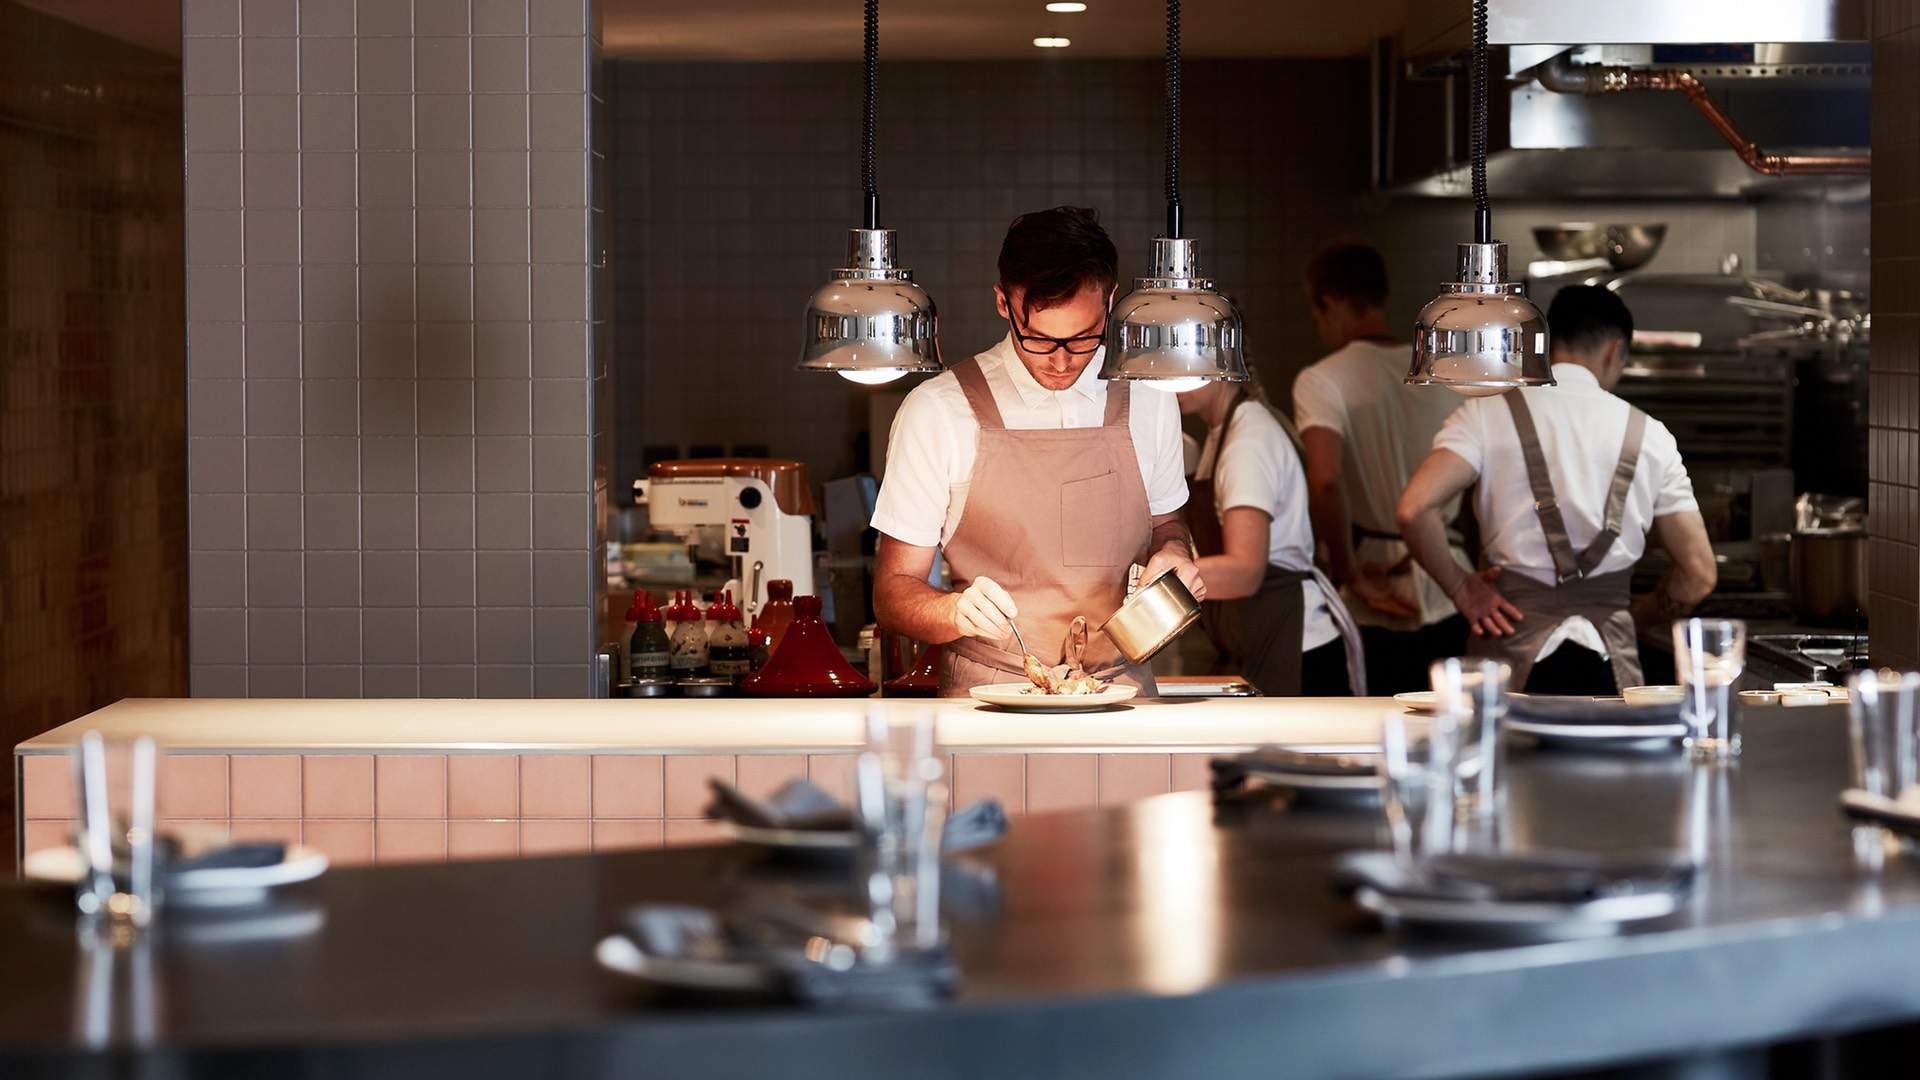 Prince Dining Room Is St Kilda's New Restaurant in the Former Circa Space